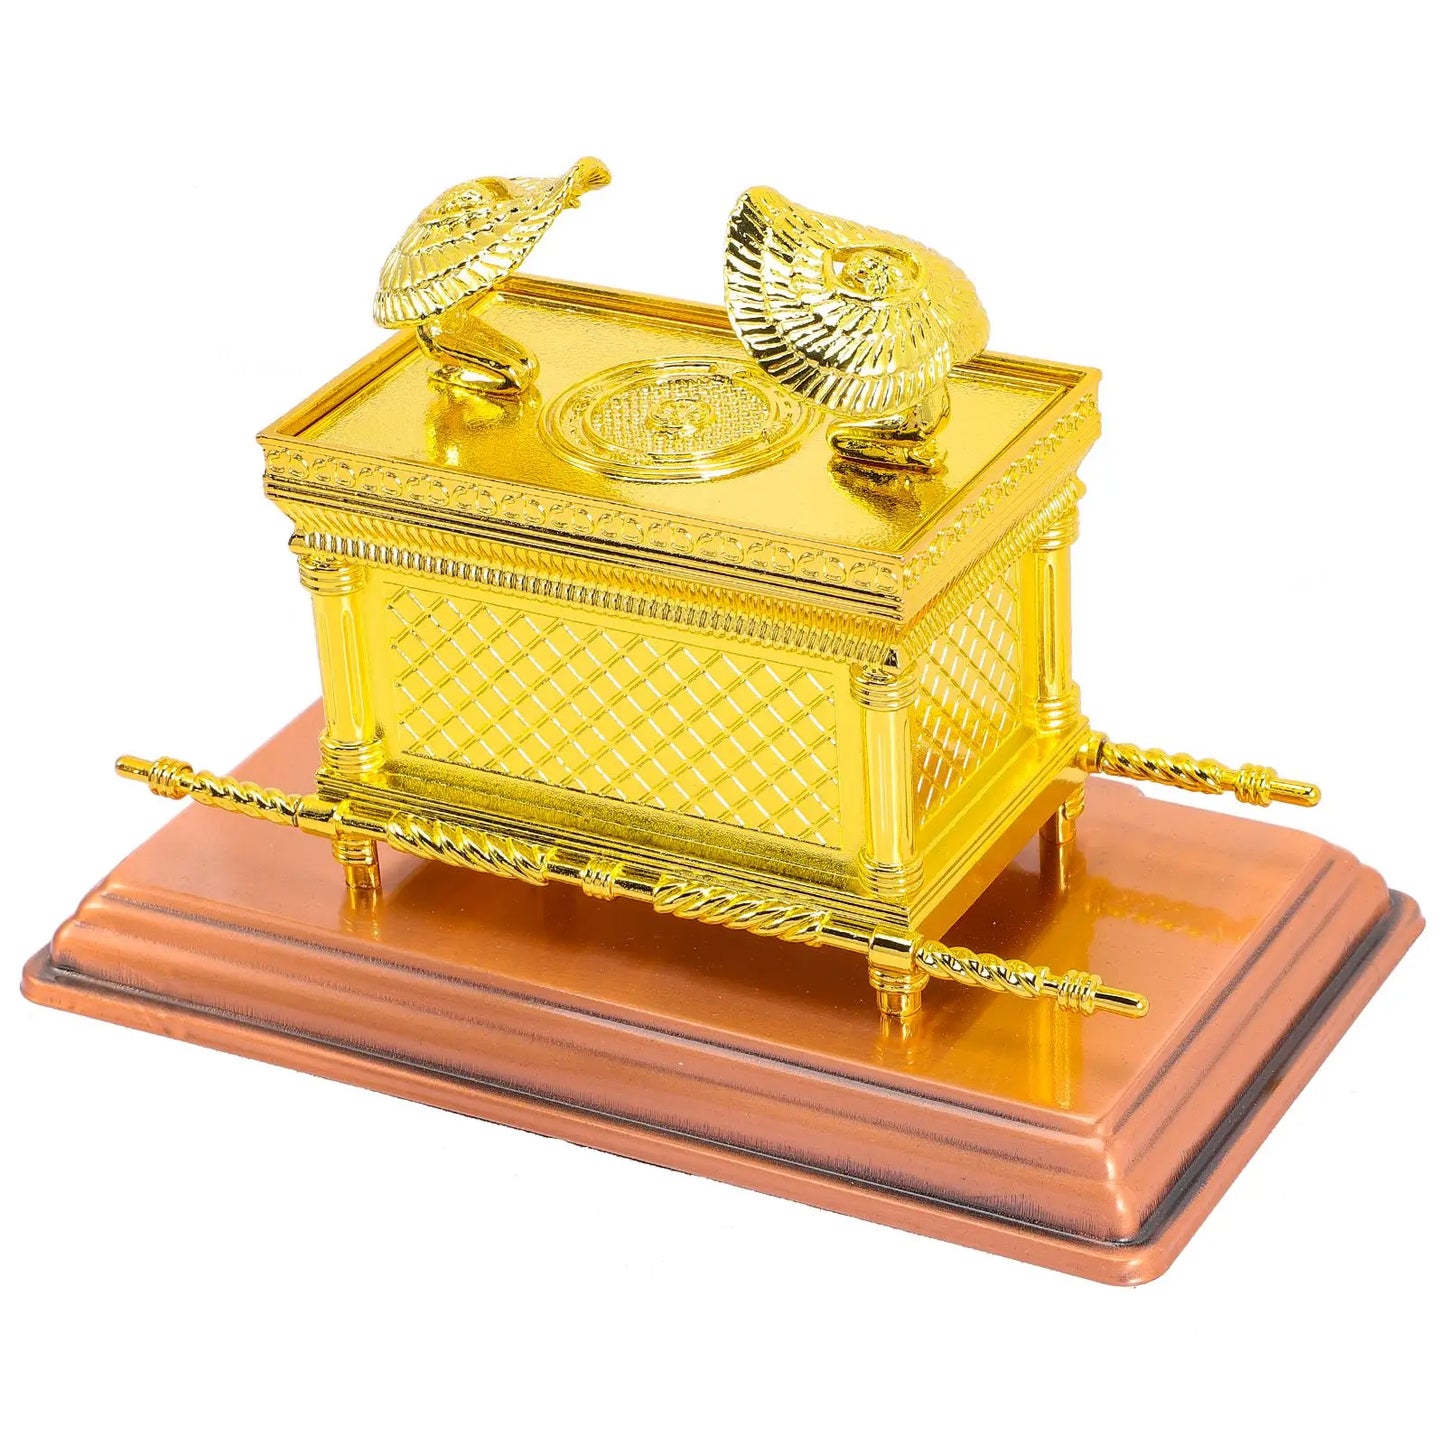 Premium Church Decor The Ark Of The Covenant Model Alloy Craft Religious Party Decoration for Home Decor Gift Option